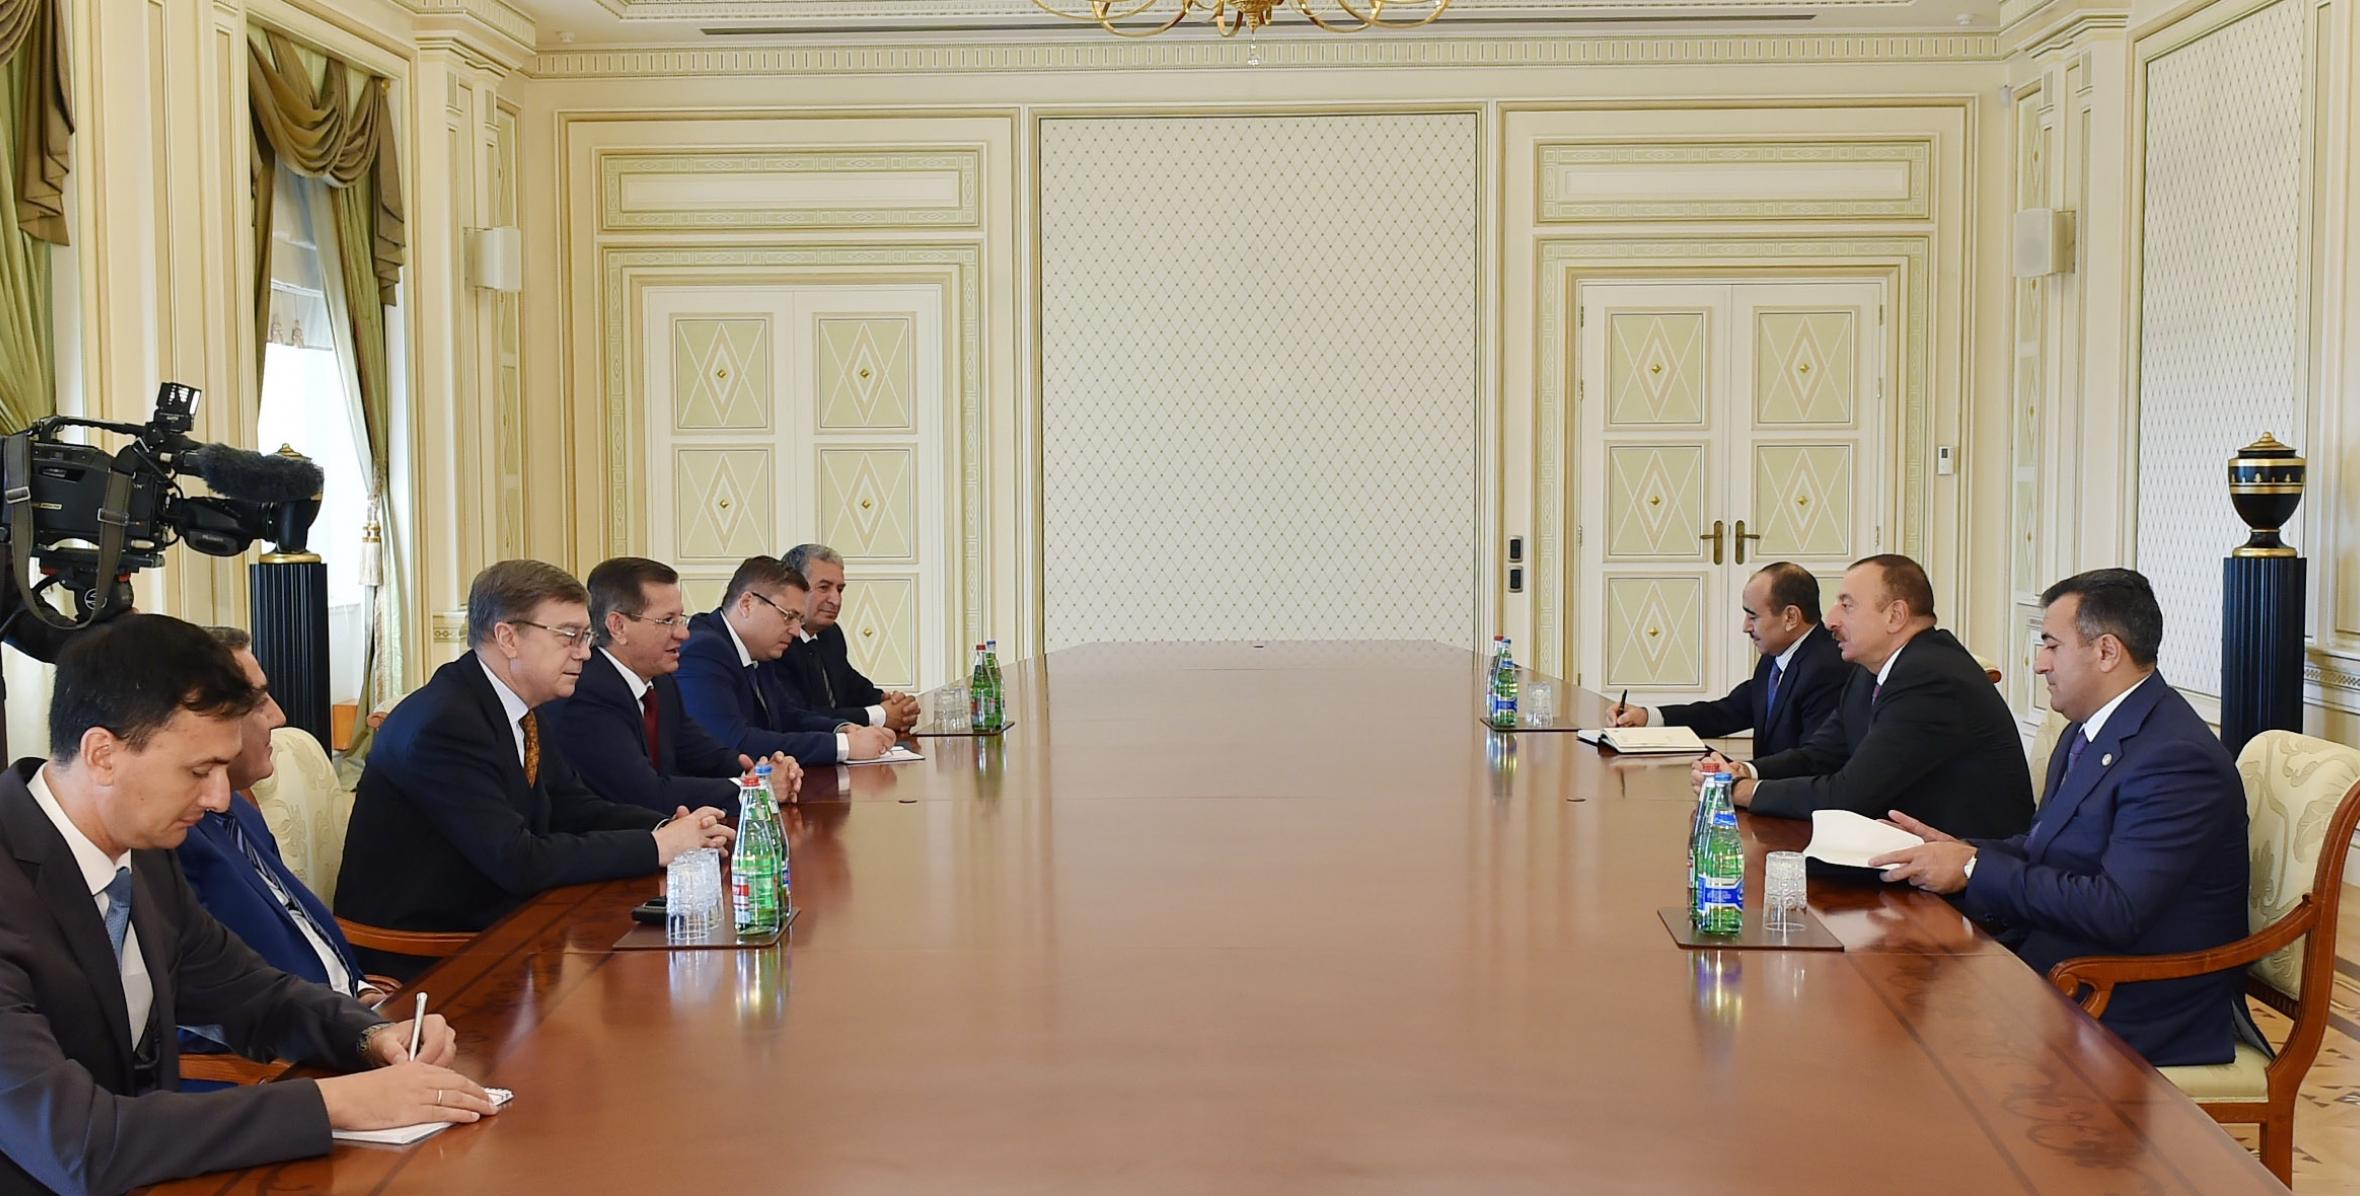 Ilham Aliyev received a delegation led by the Governor of Astrakhan Region of Russia